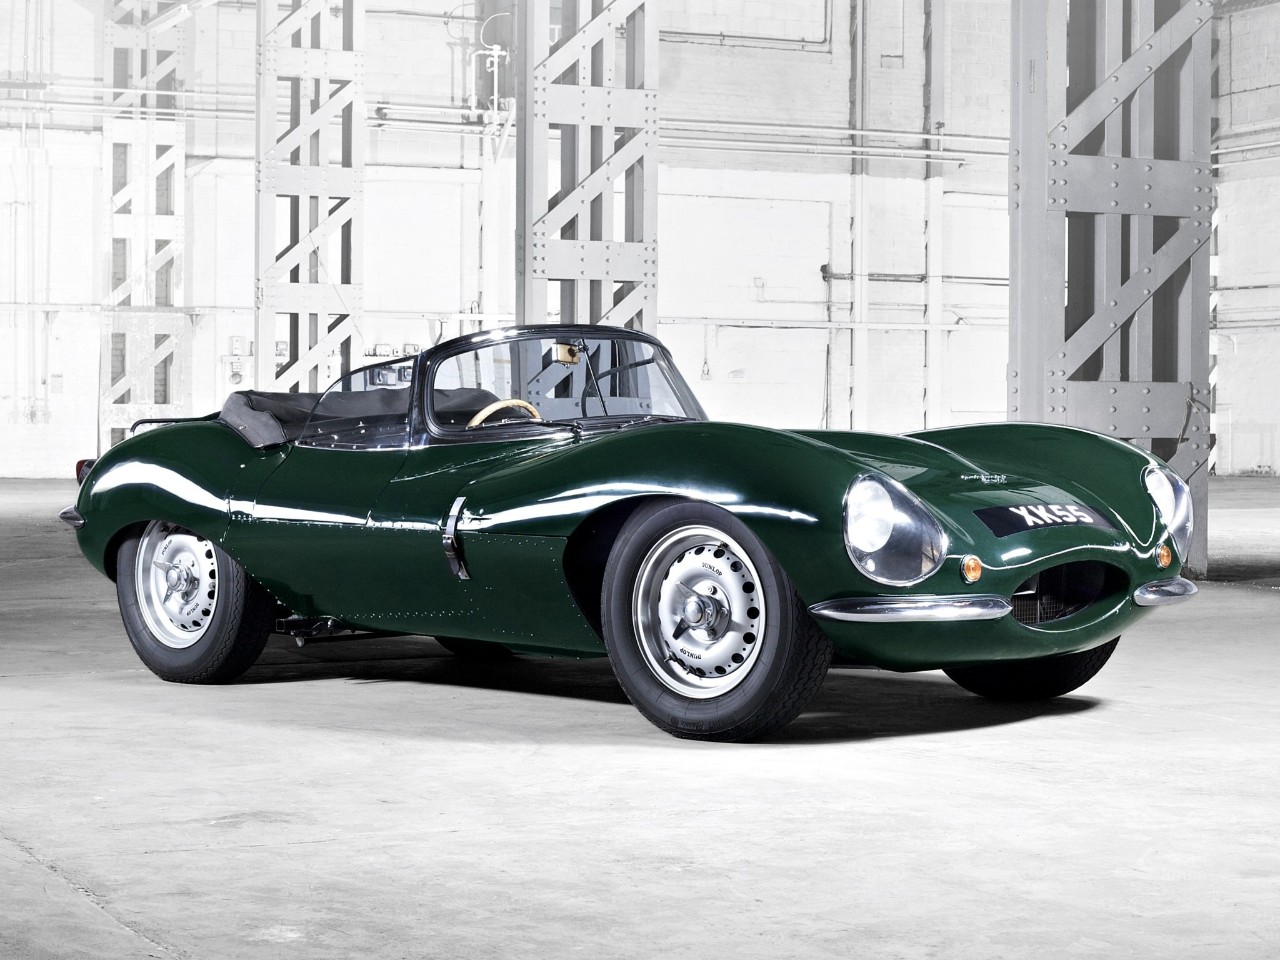 Jaguar Is Considering an XKSS Continuation